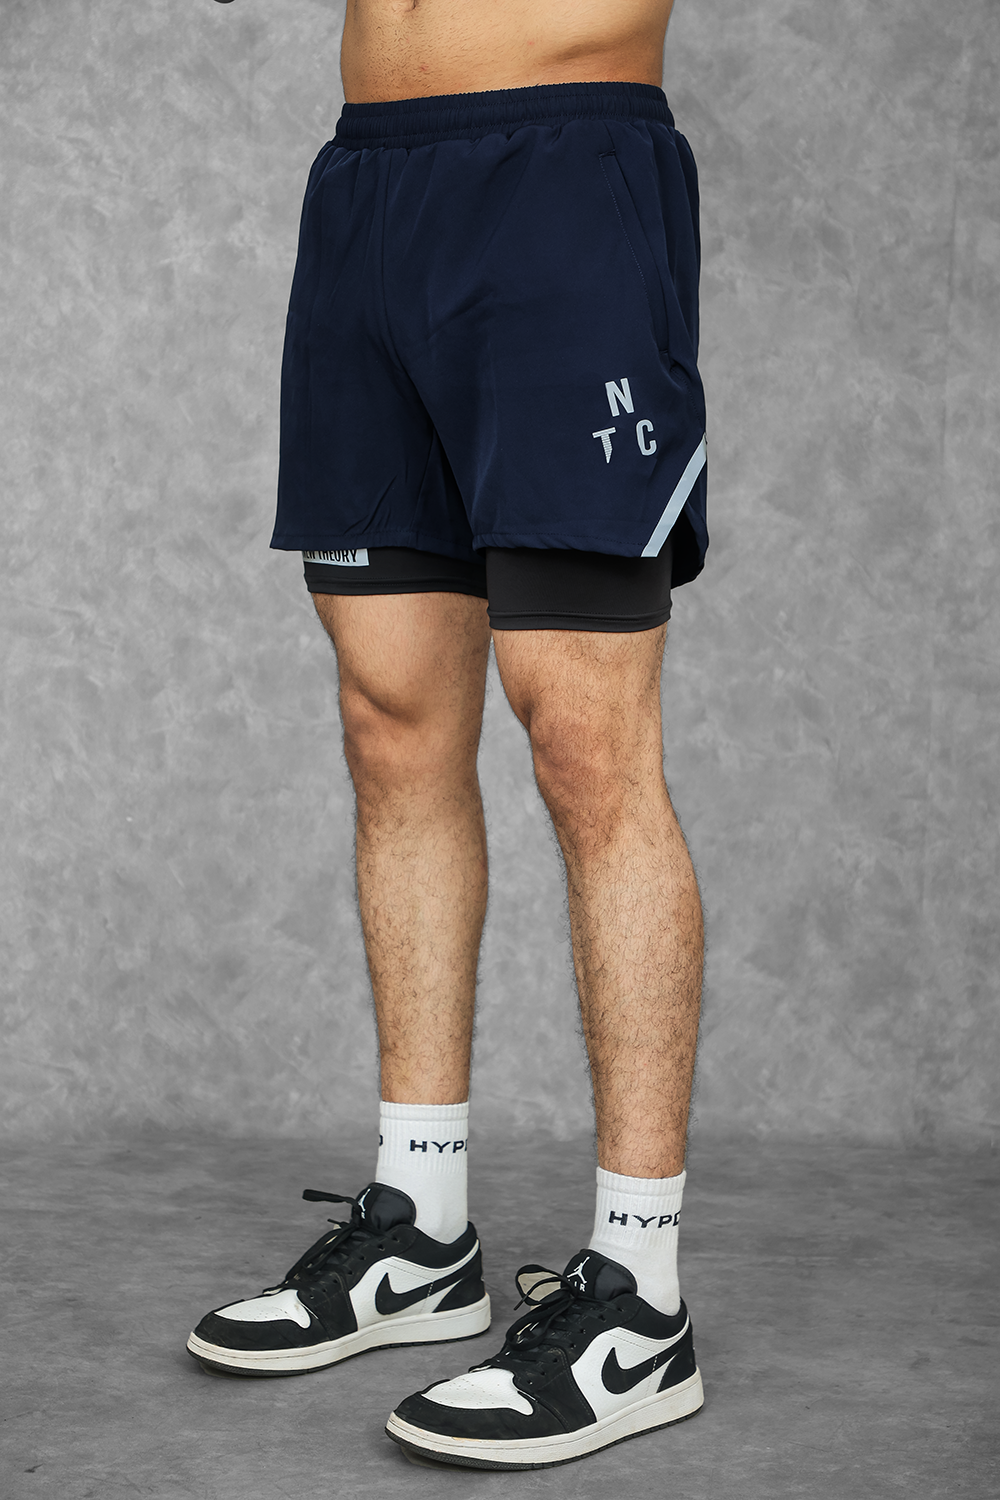 Critical performance Shorts 5 Inch - Navy